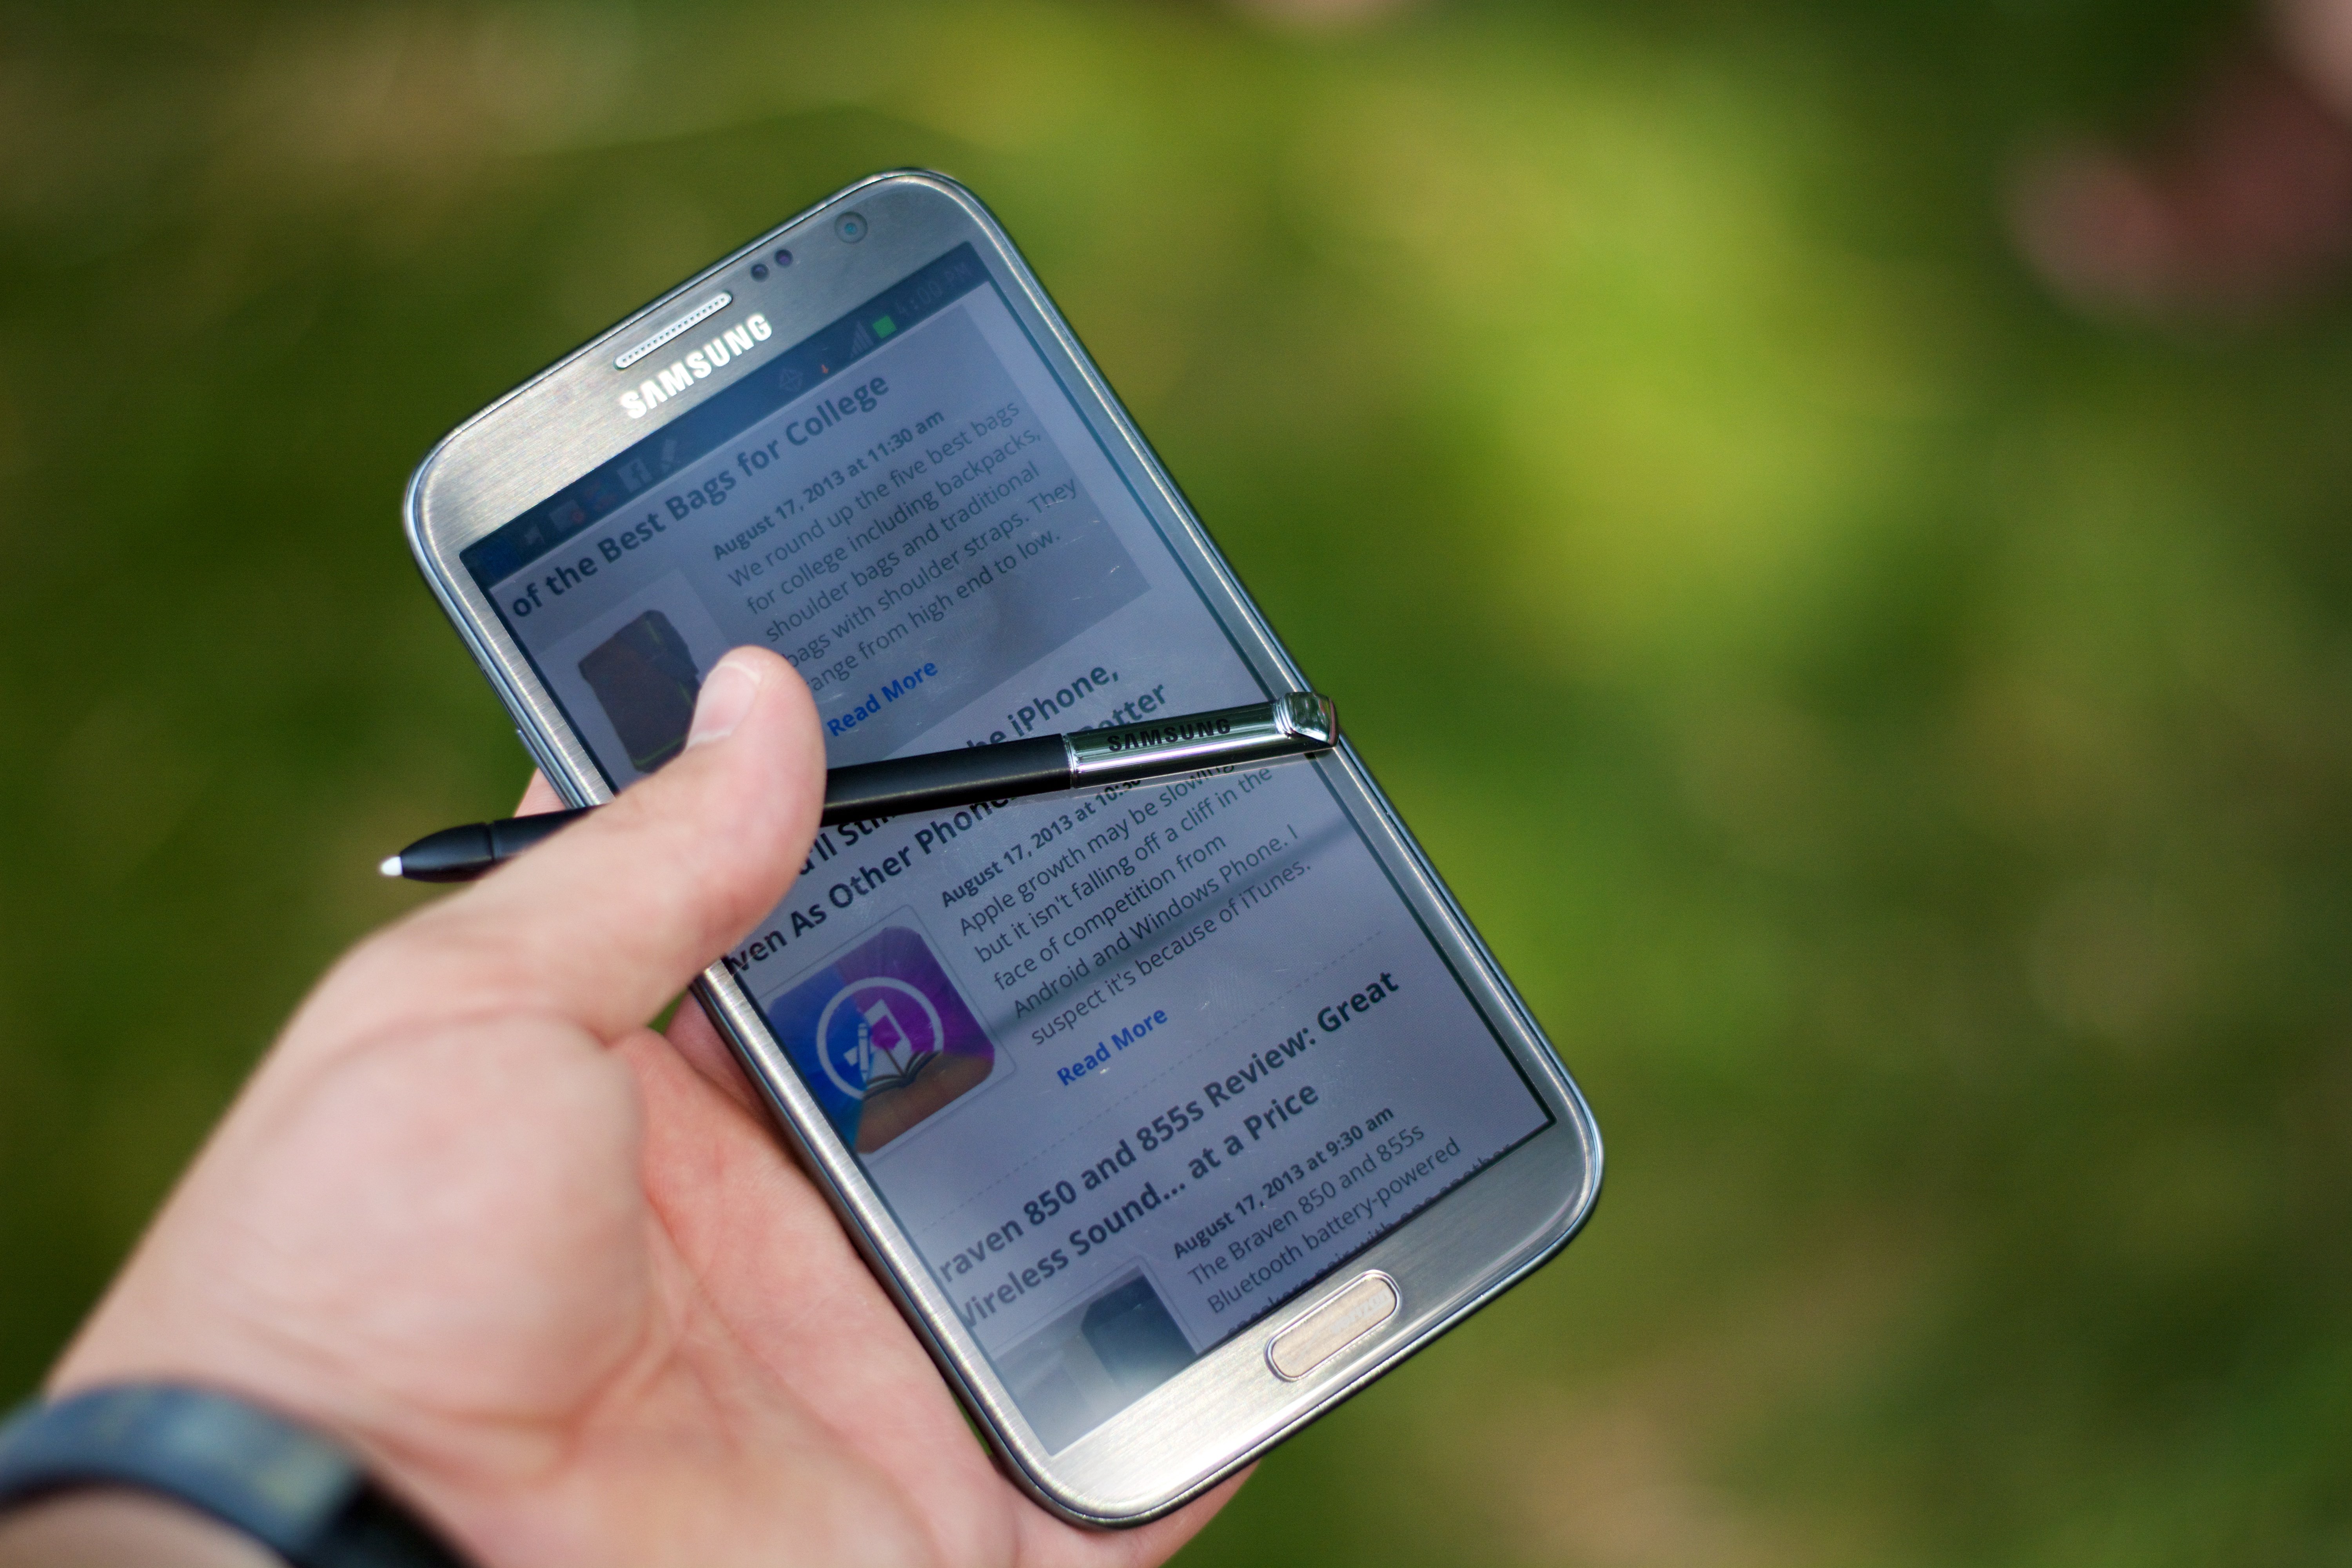 Watch our Samsung Galaxy Note 3 video of rumor roundups and release date predictions.